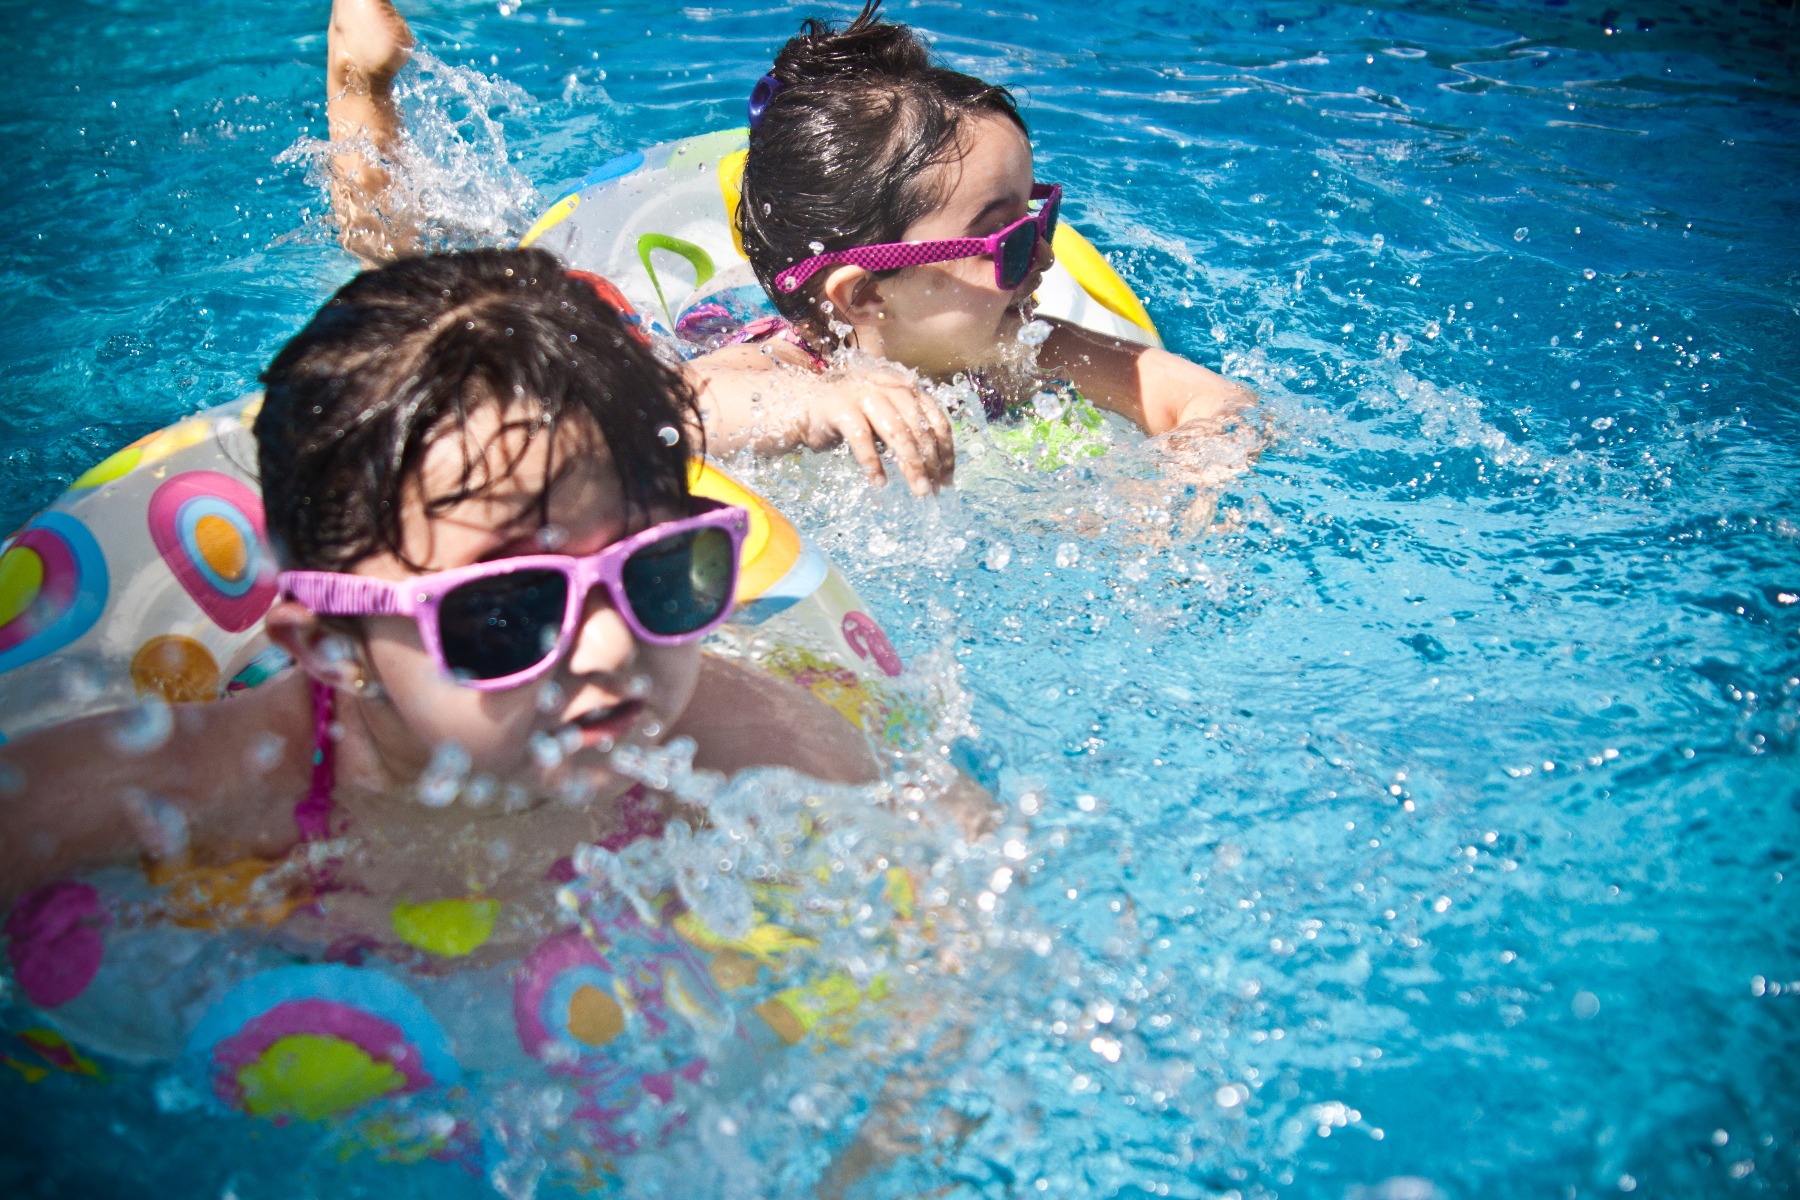 Teaching your kids to swim early will improve their confidence in the water